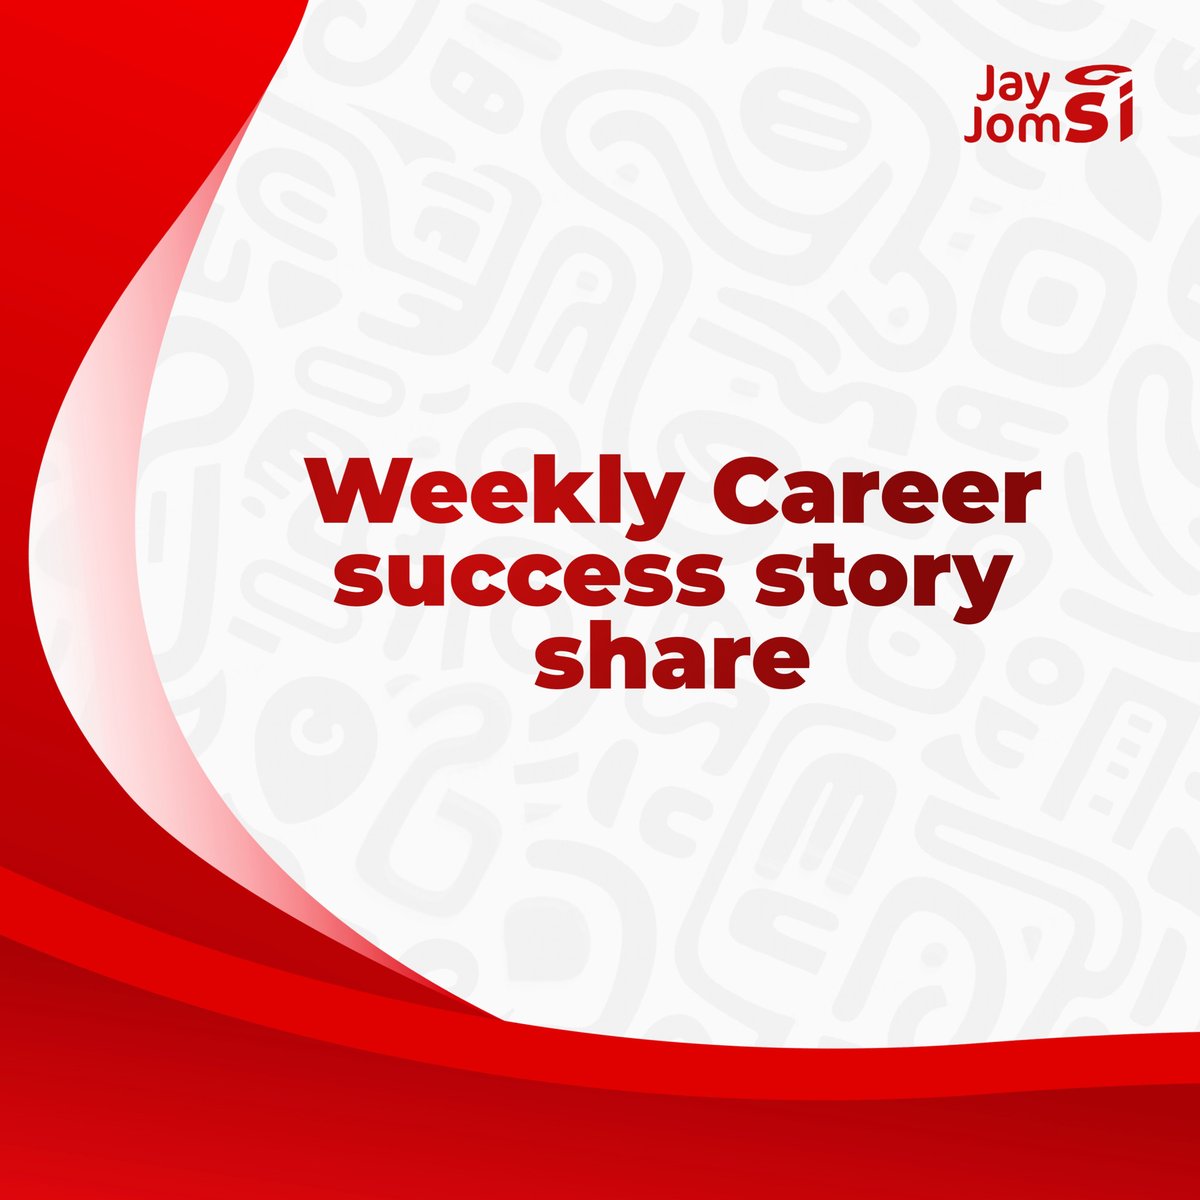 Have you recently achieved a career milestone? 

Whether big or small, share your success in the comments and inspire others! 

#SuccessStories #CareerWins